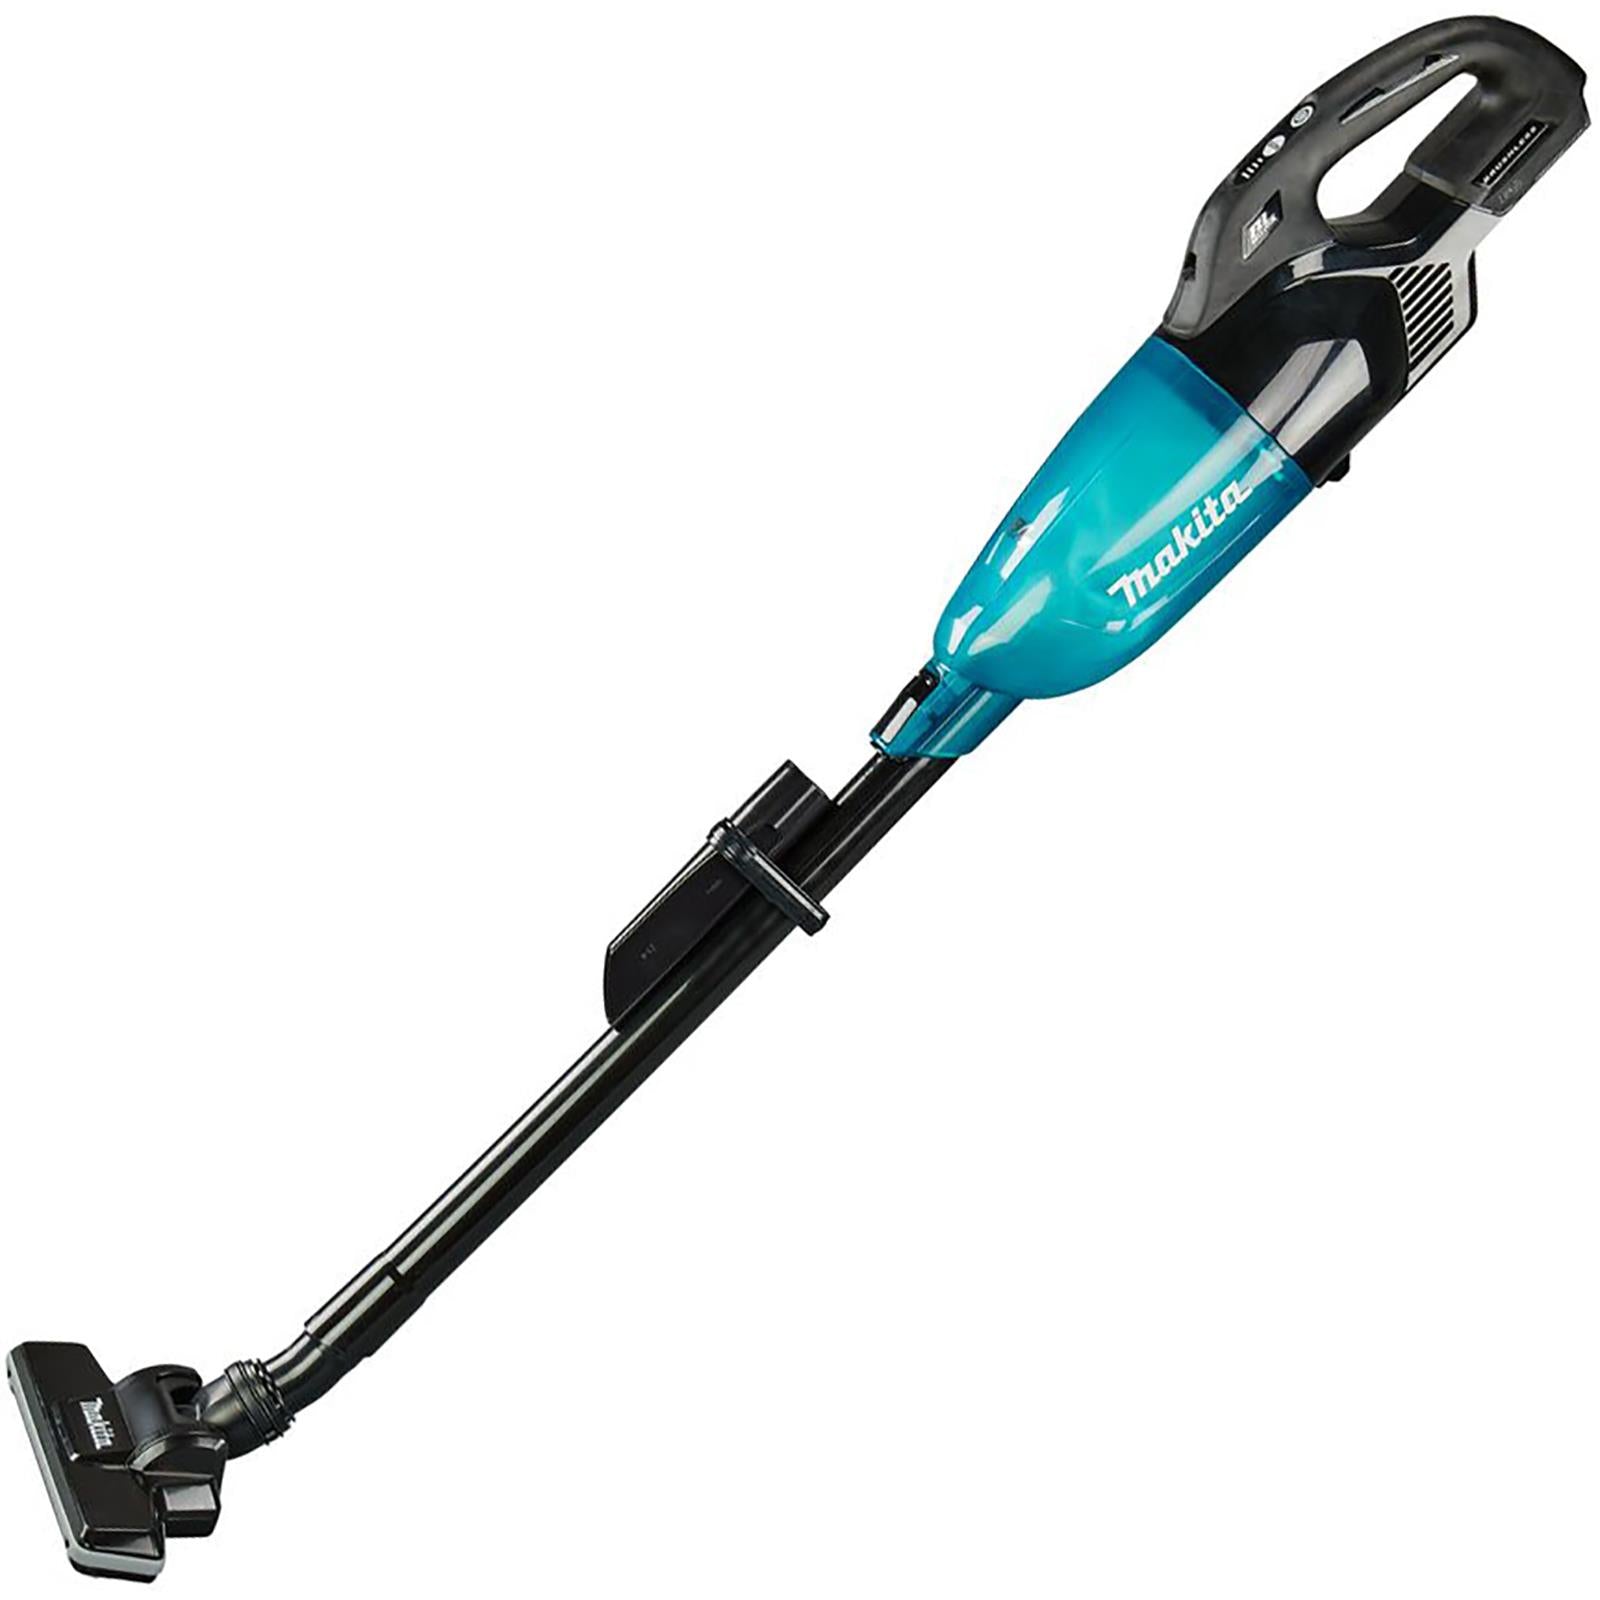 Makita Vacuum Cleaner 18V LXT Li-ion Brushless Cordless Body Only DCL284FZB